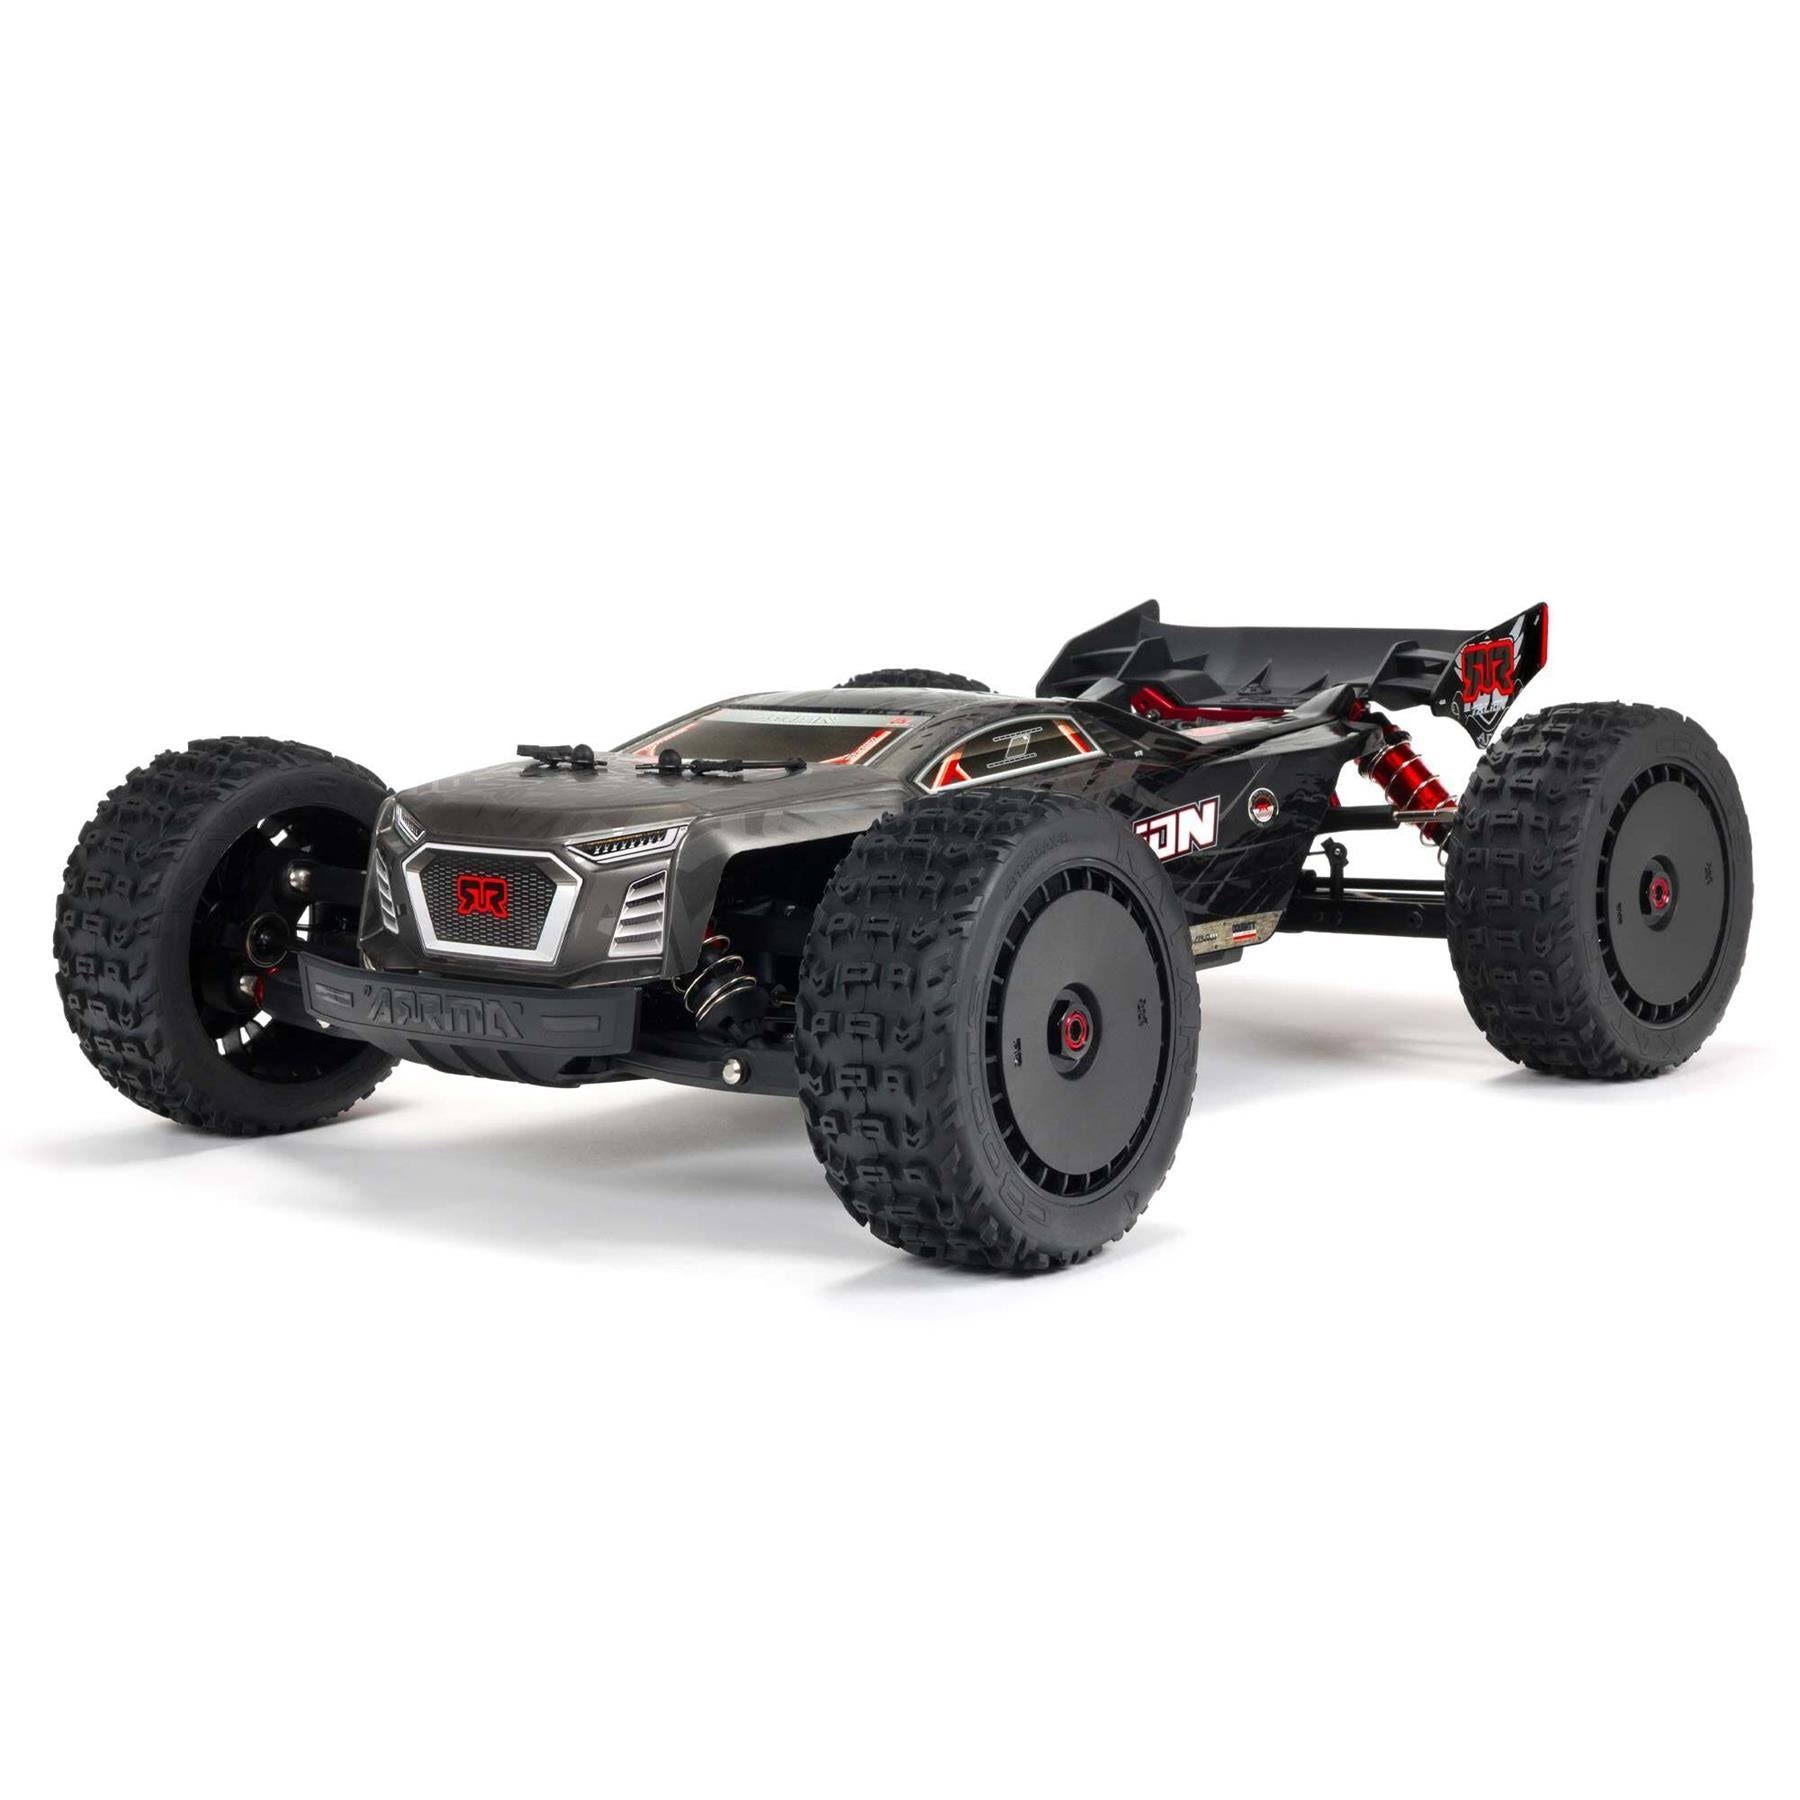 Arrma Rc Truck 1/8 Talion 6s Blx 4wd Extreme Bash Speed Truggy Rtr (battery And Charger Not Included), Black, Ara8707 Arrma